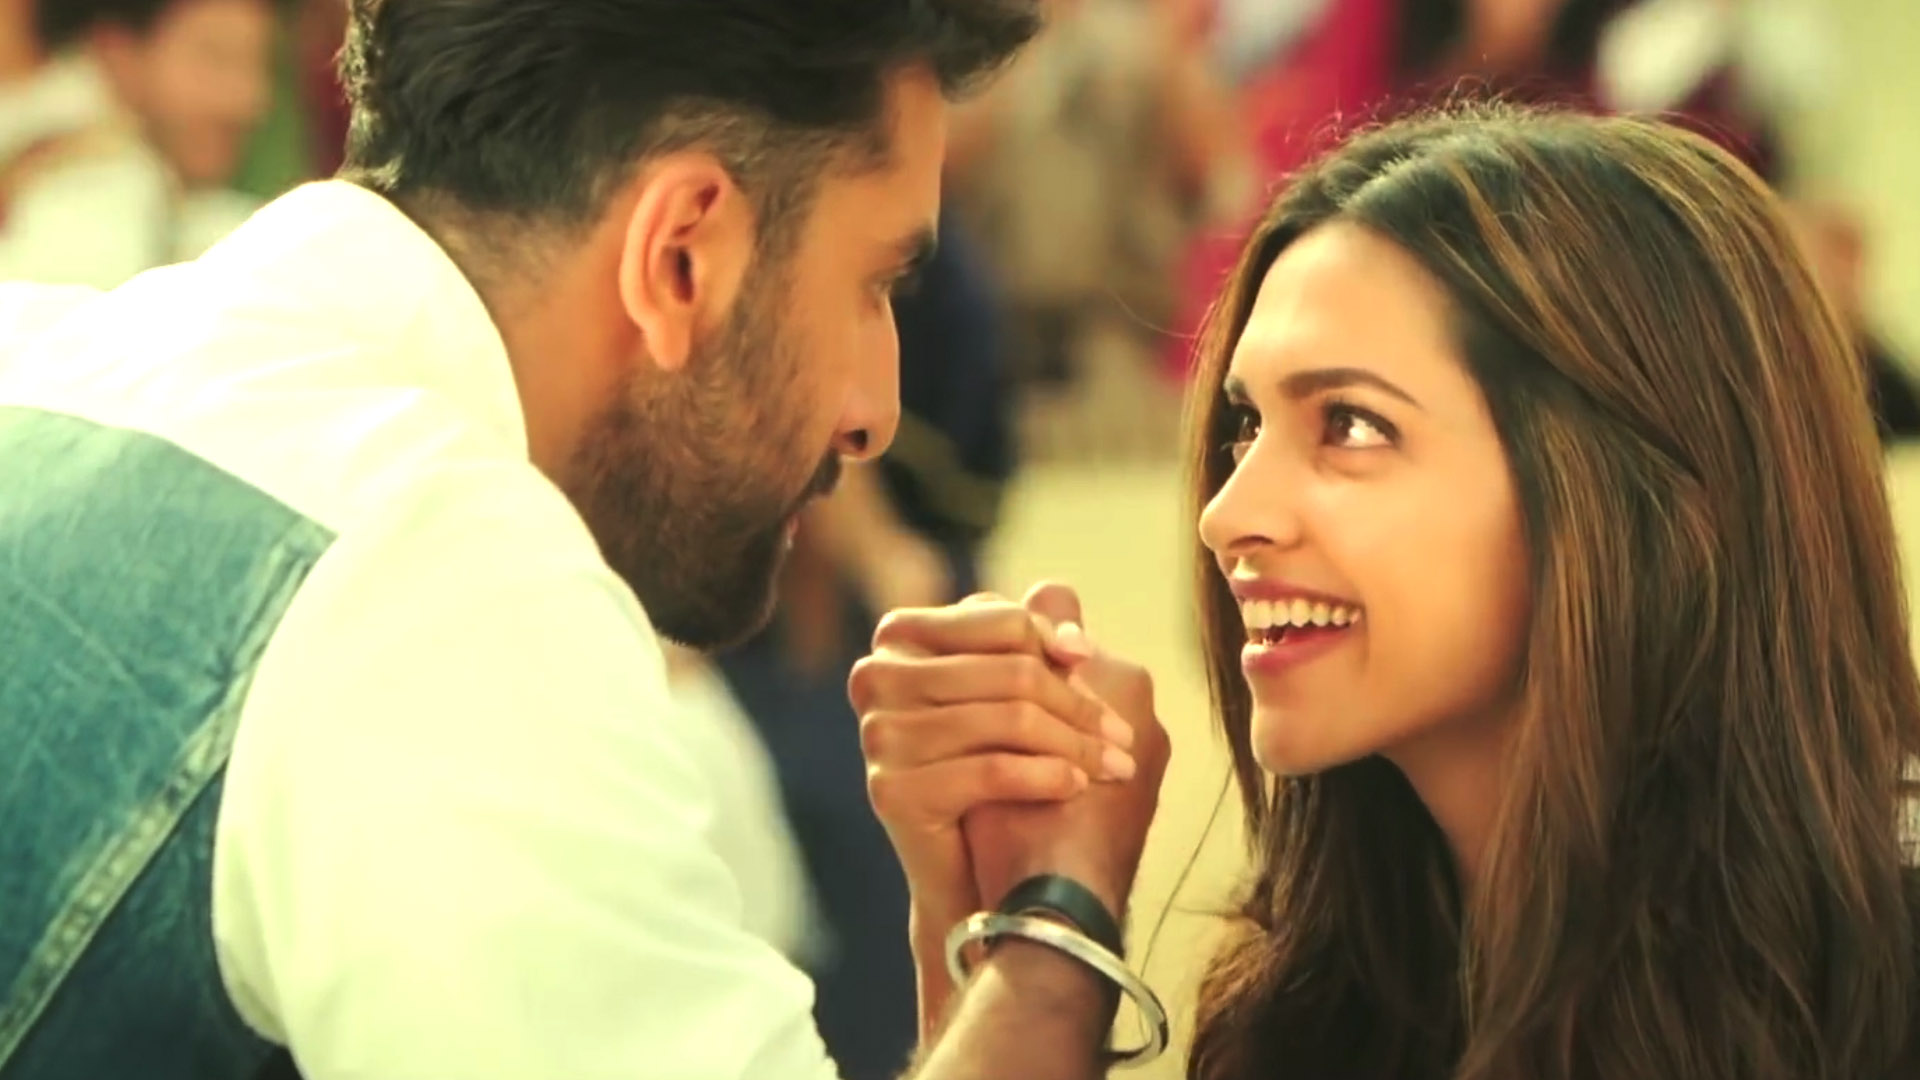 Movie Review: Tamasha Is Not Worthy Of A Review. It's Worth A Lot More